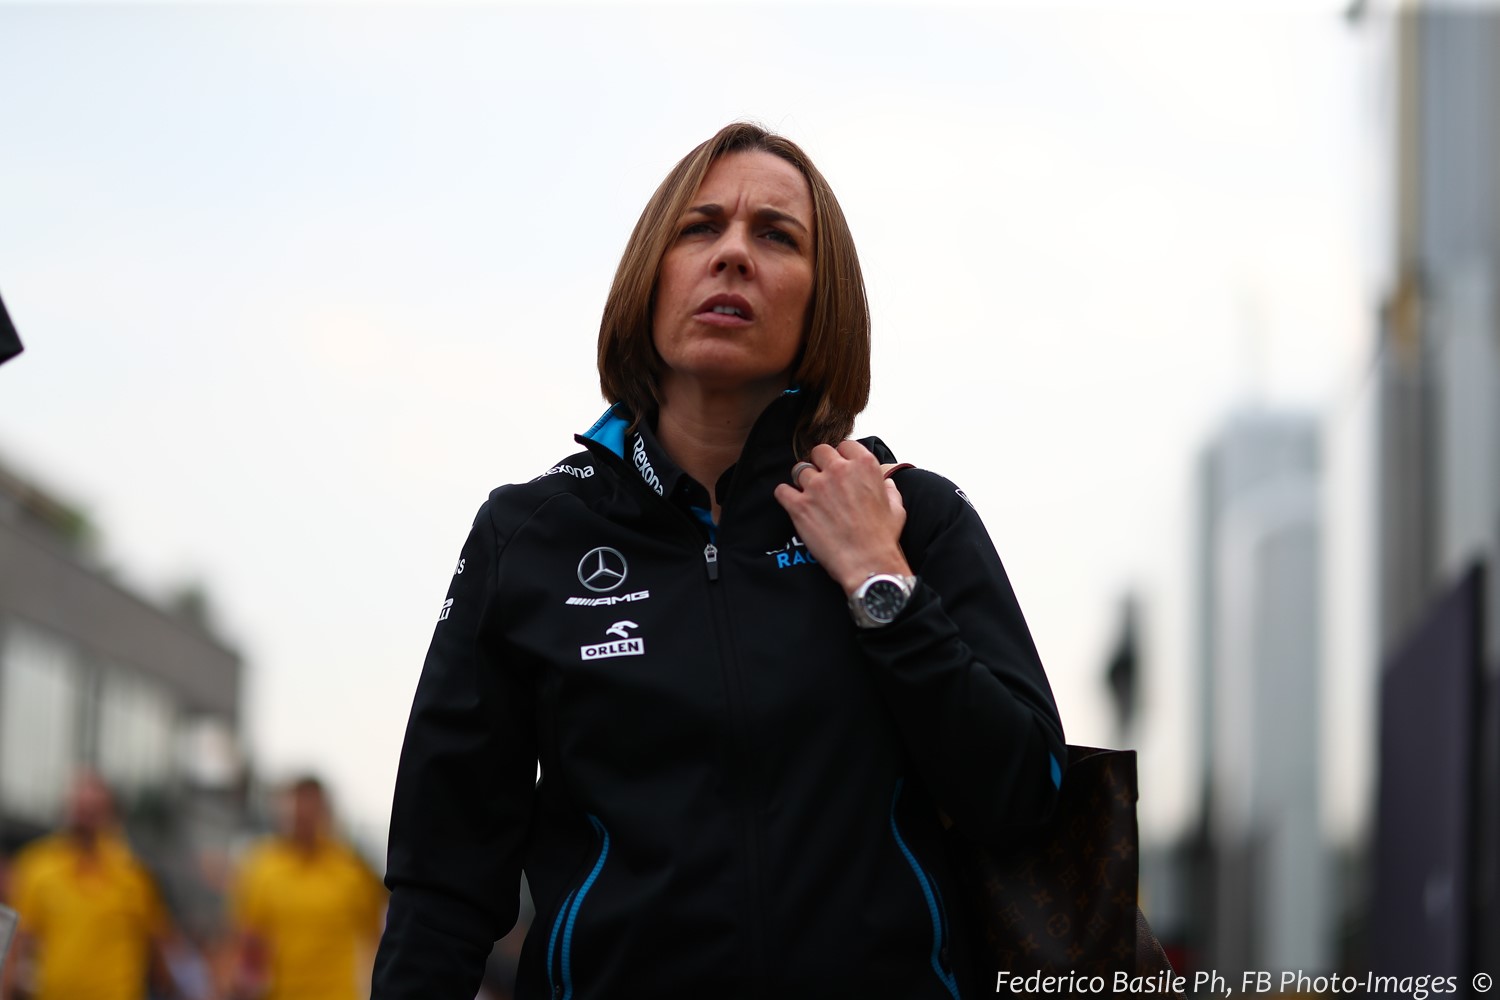 Claire WIlliams - running dad's company into the ground?